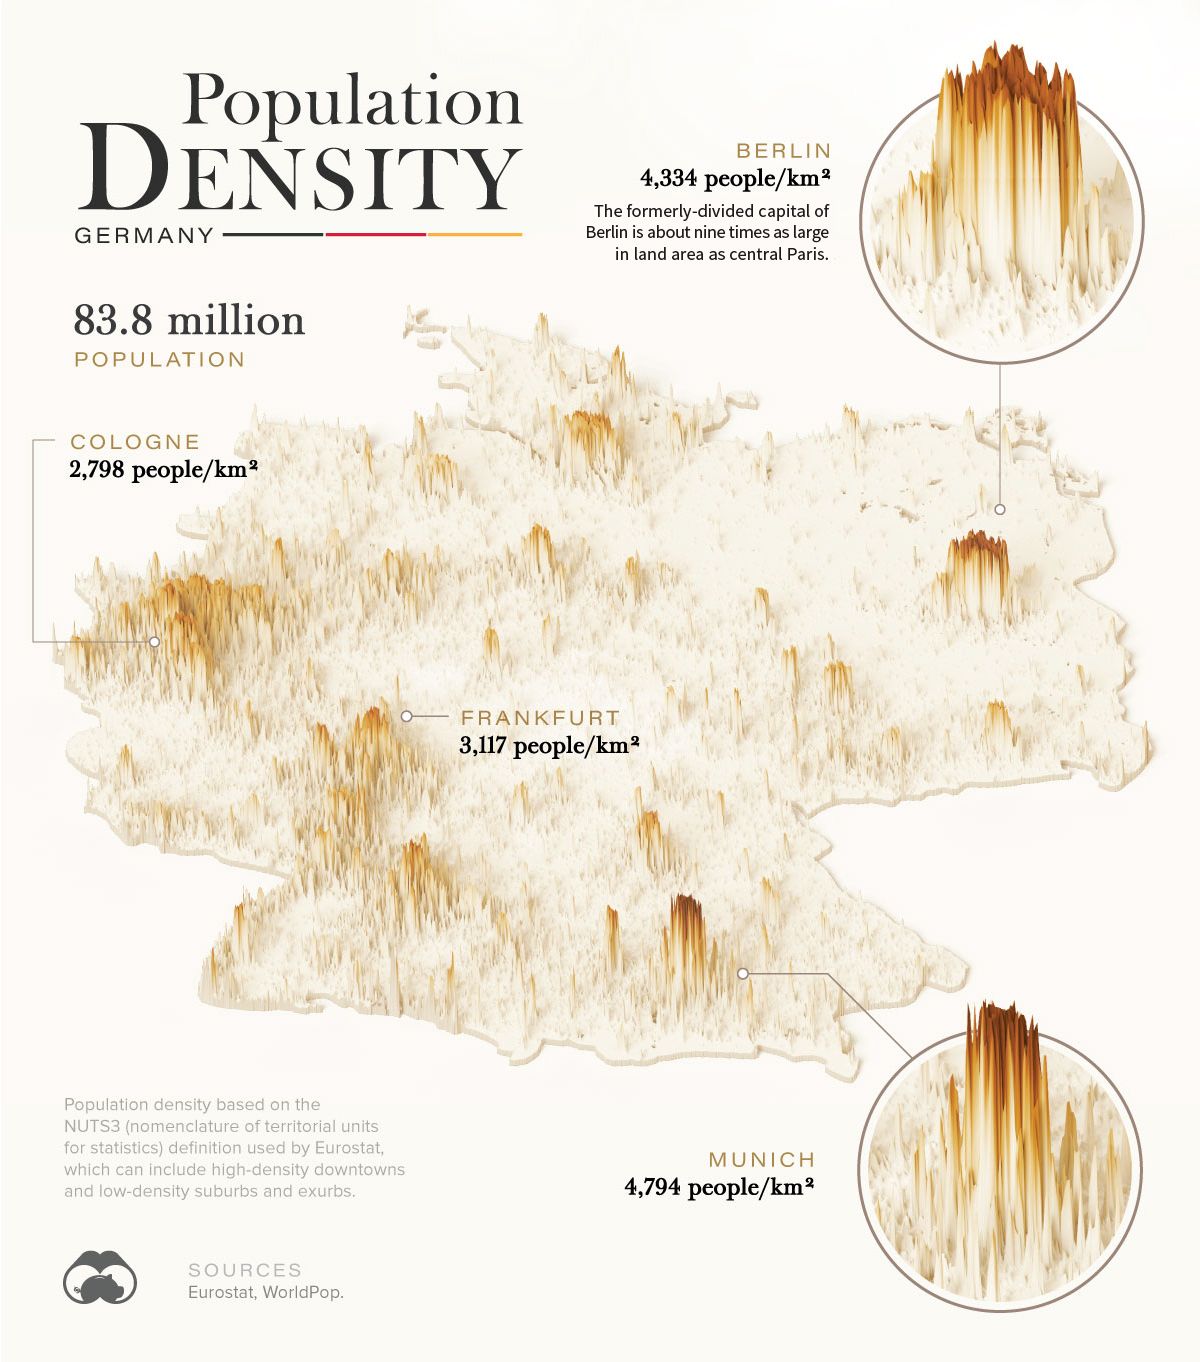 This 3D map shows the population density of Germany.